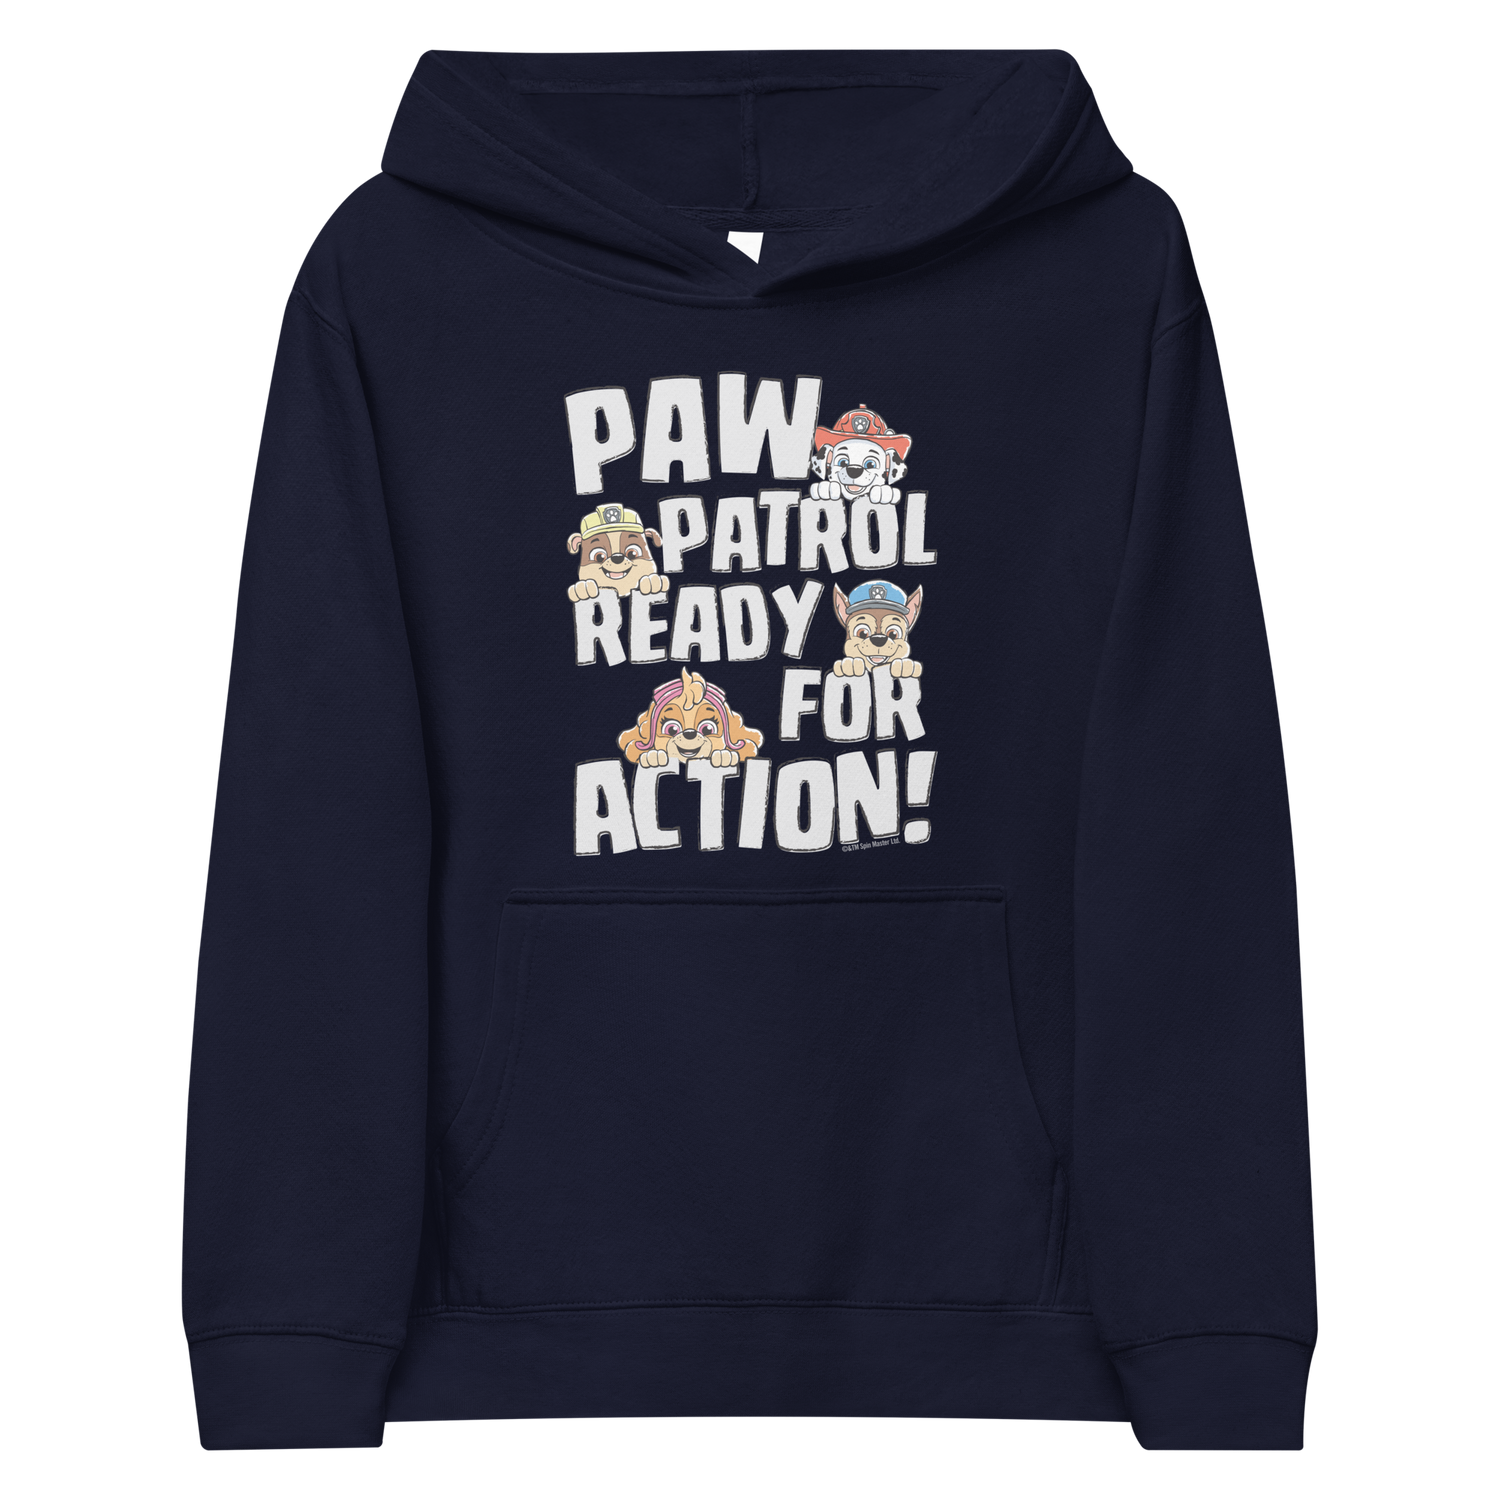 PAW Patrol Ready For Action Kids Hooded Sweatshirt